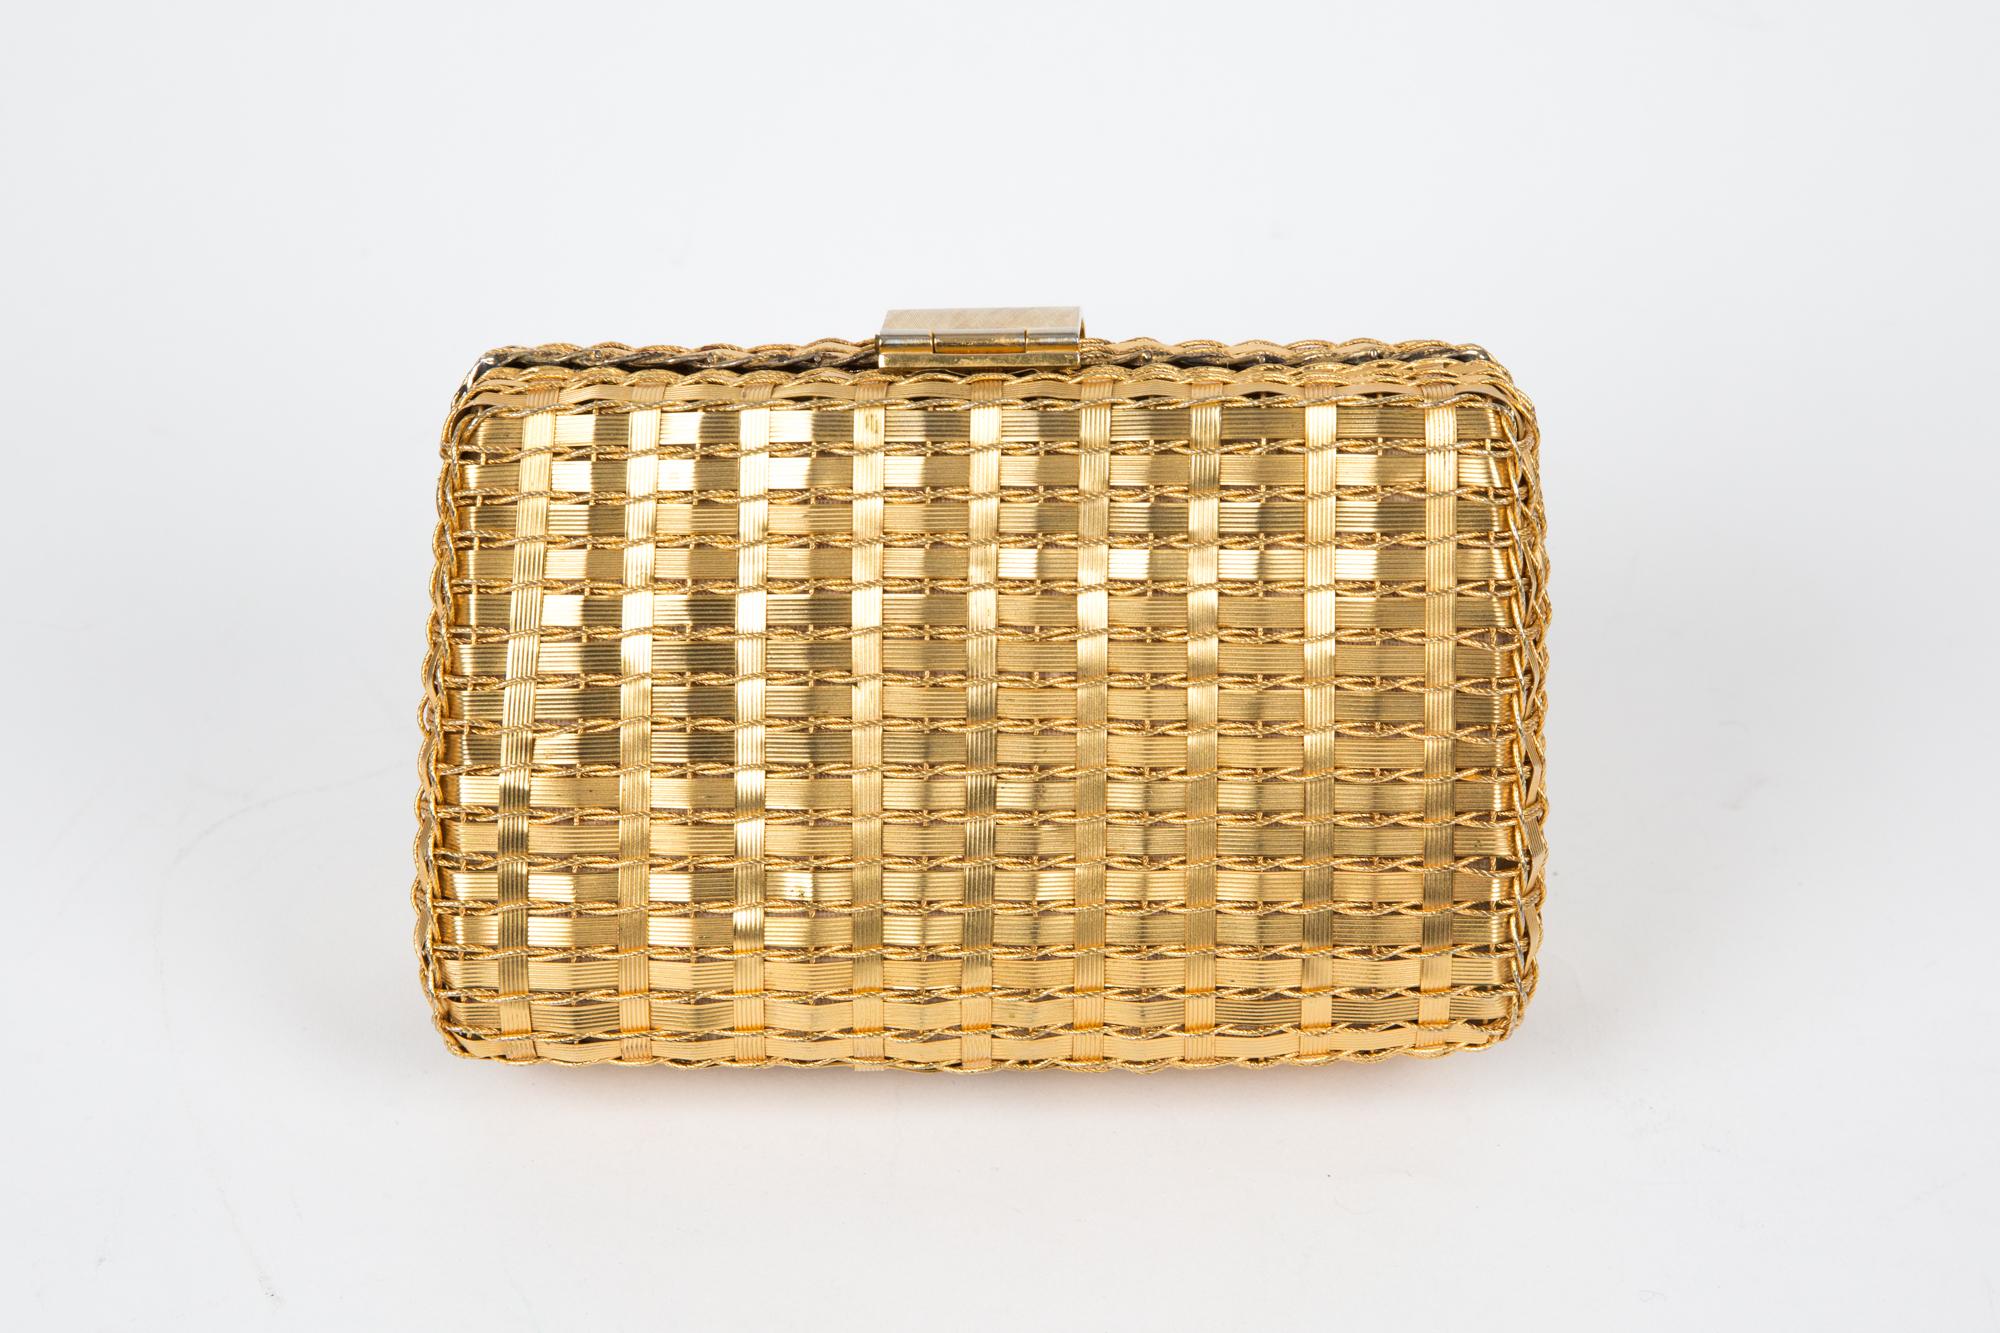 Rodo gold-tone metal clutch bag featuring gold-tone metal woven, a claps opening, a rectangular shape, a leather gold-tone lining, and inside red stamped signature and an inside pocket.
Circa: 1970s
In good vintage condition. Made in Italy.
Length: